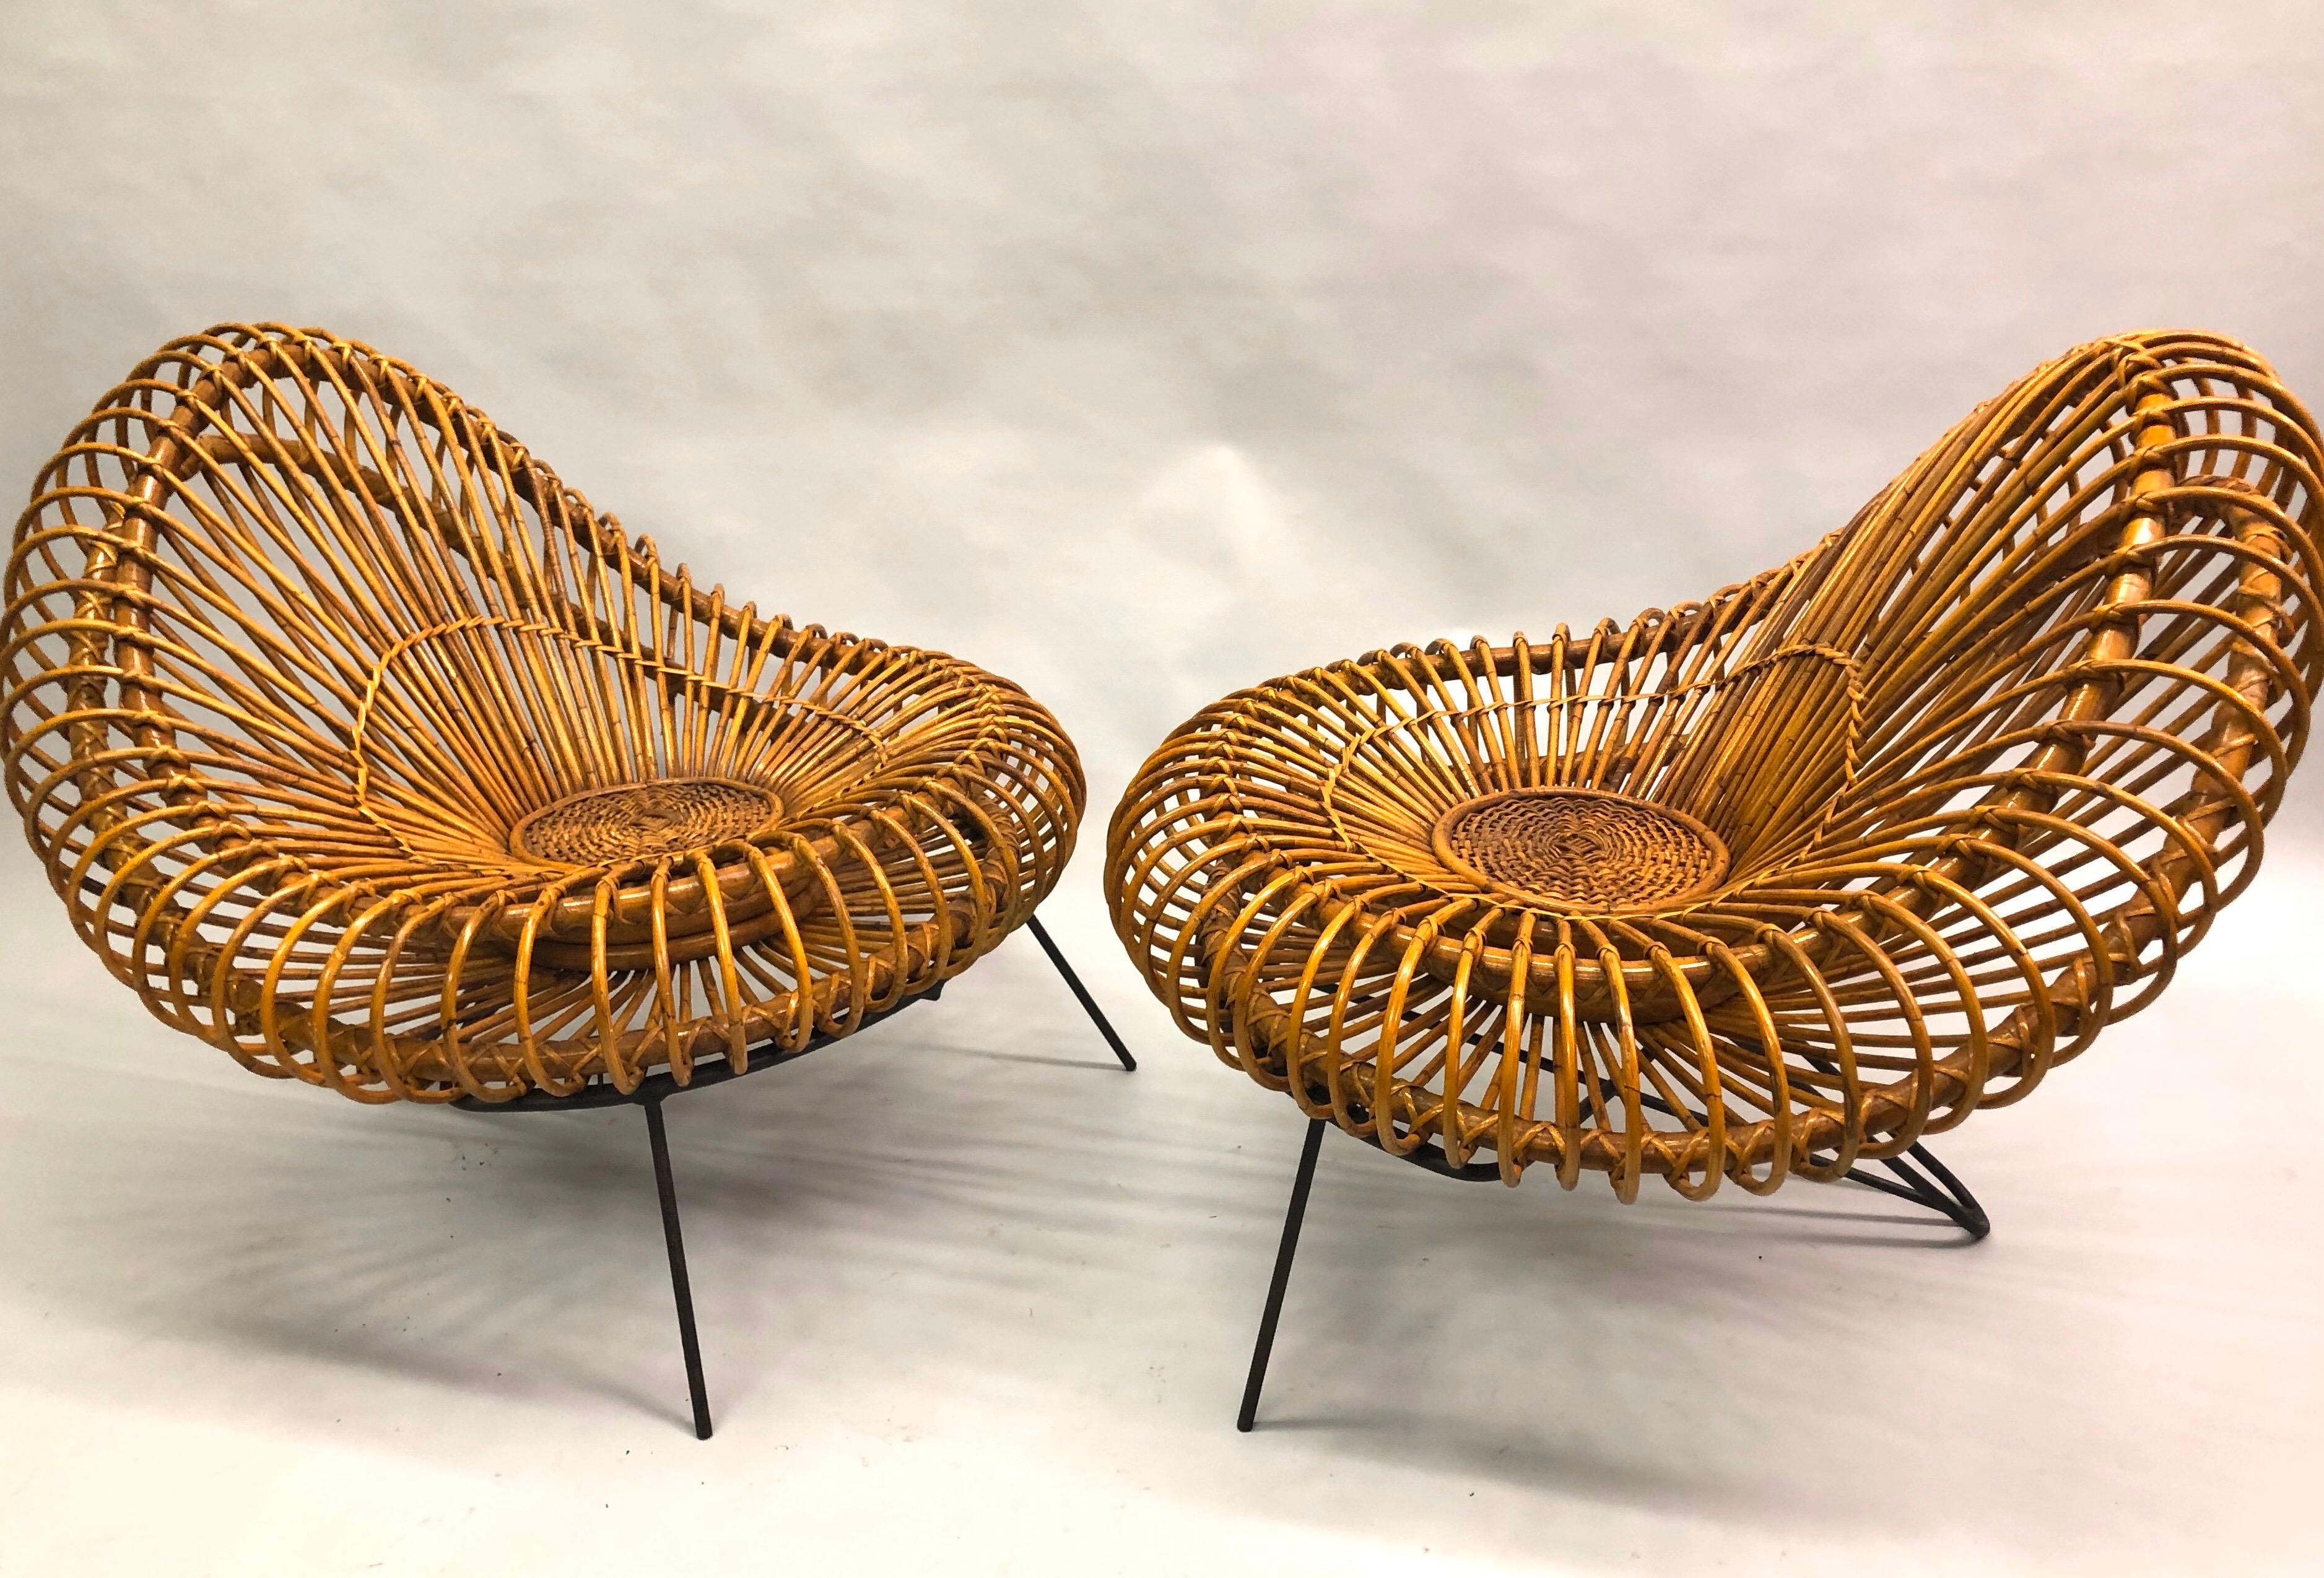 20th Century Pair of French Mid-century Rattan Lounge Chairs by Janine Abraham & Dirk Jan Roi